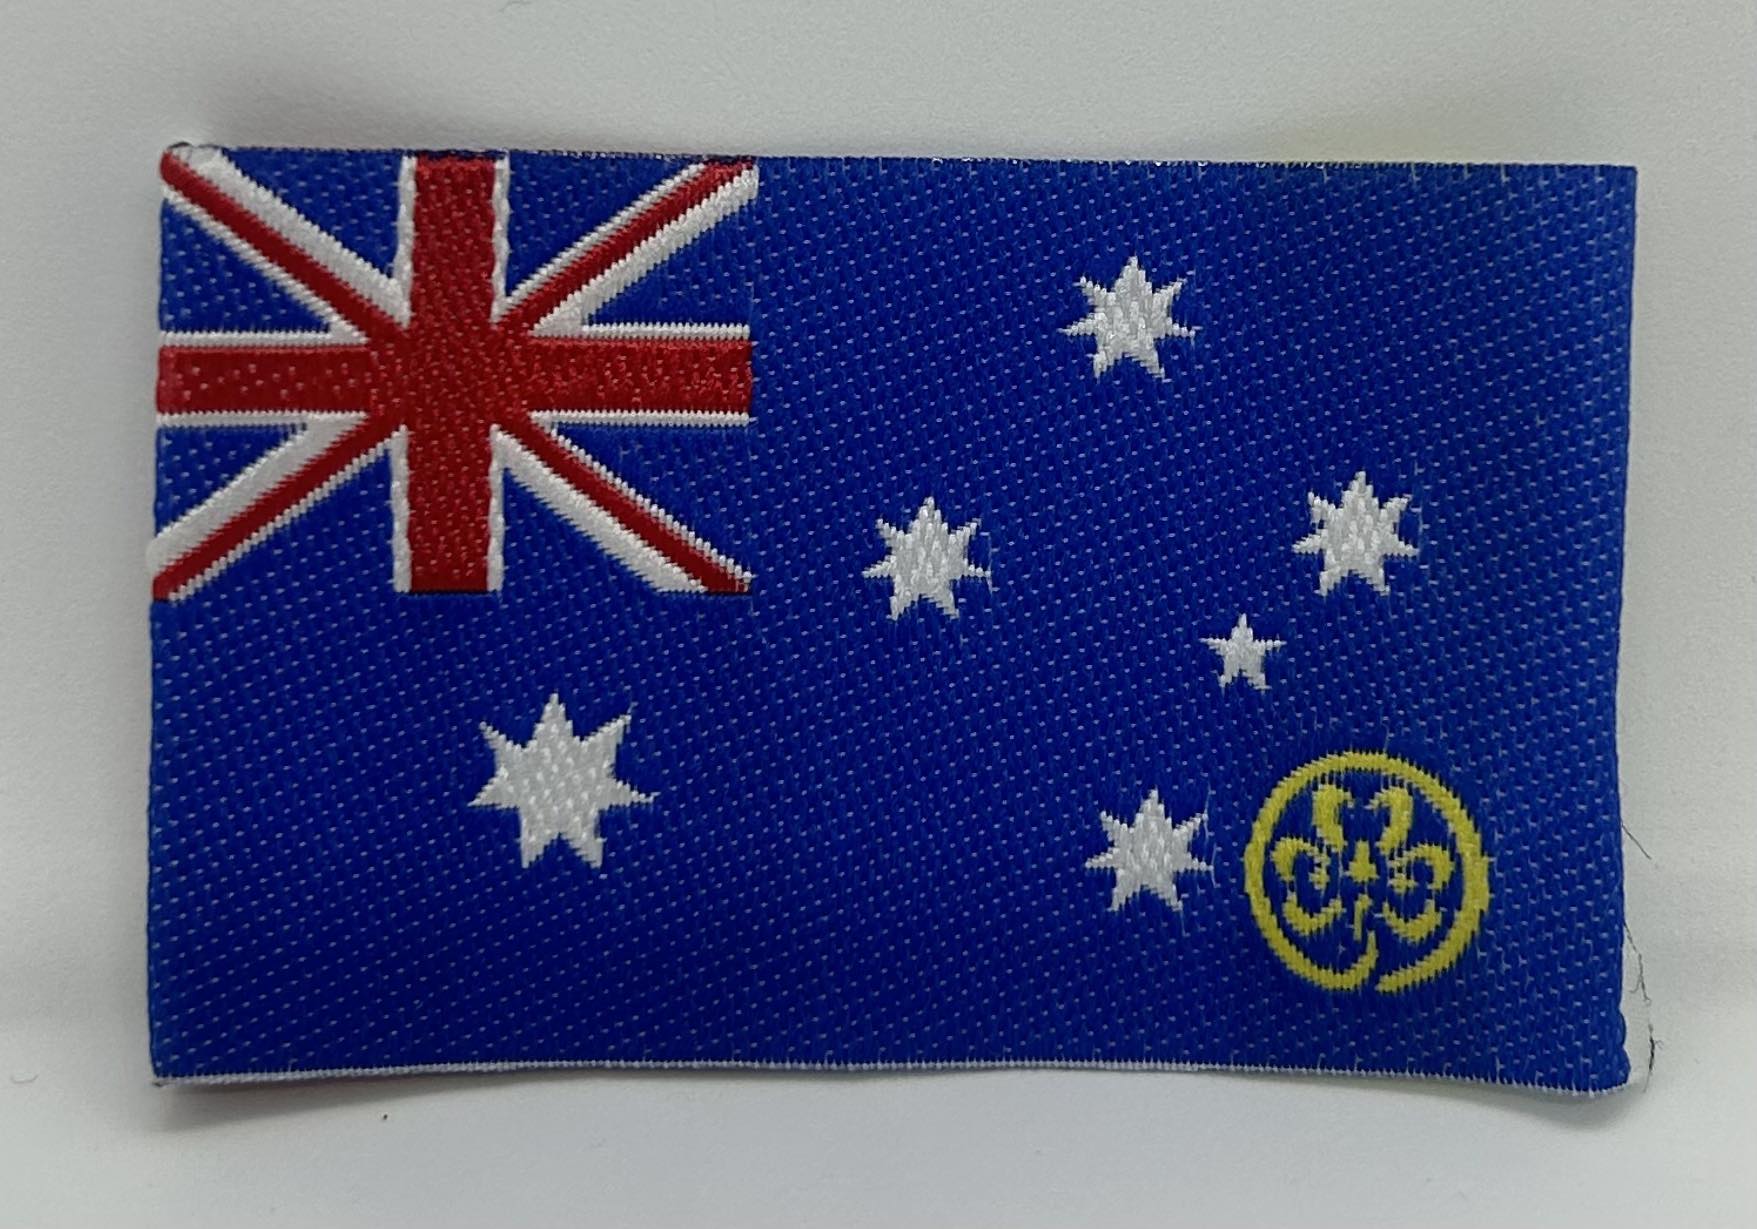 unbound badge of the Australian flag with a gold trefoil in the bottom right